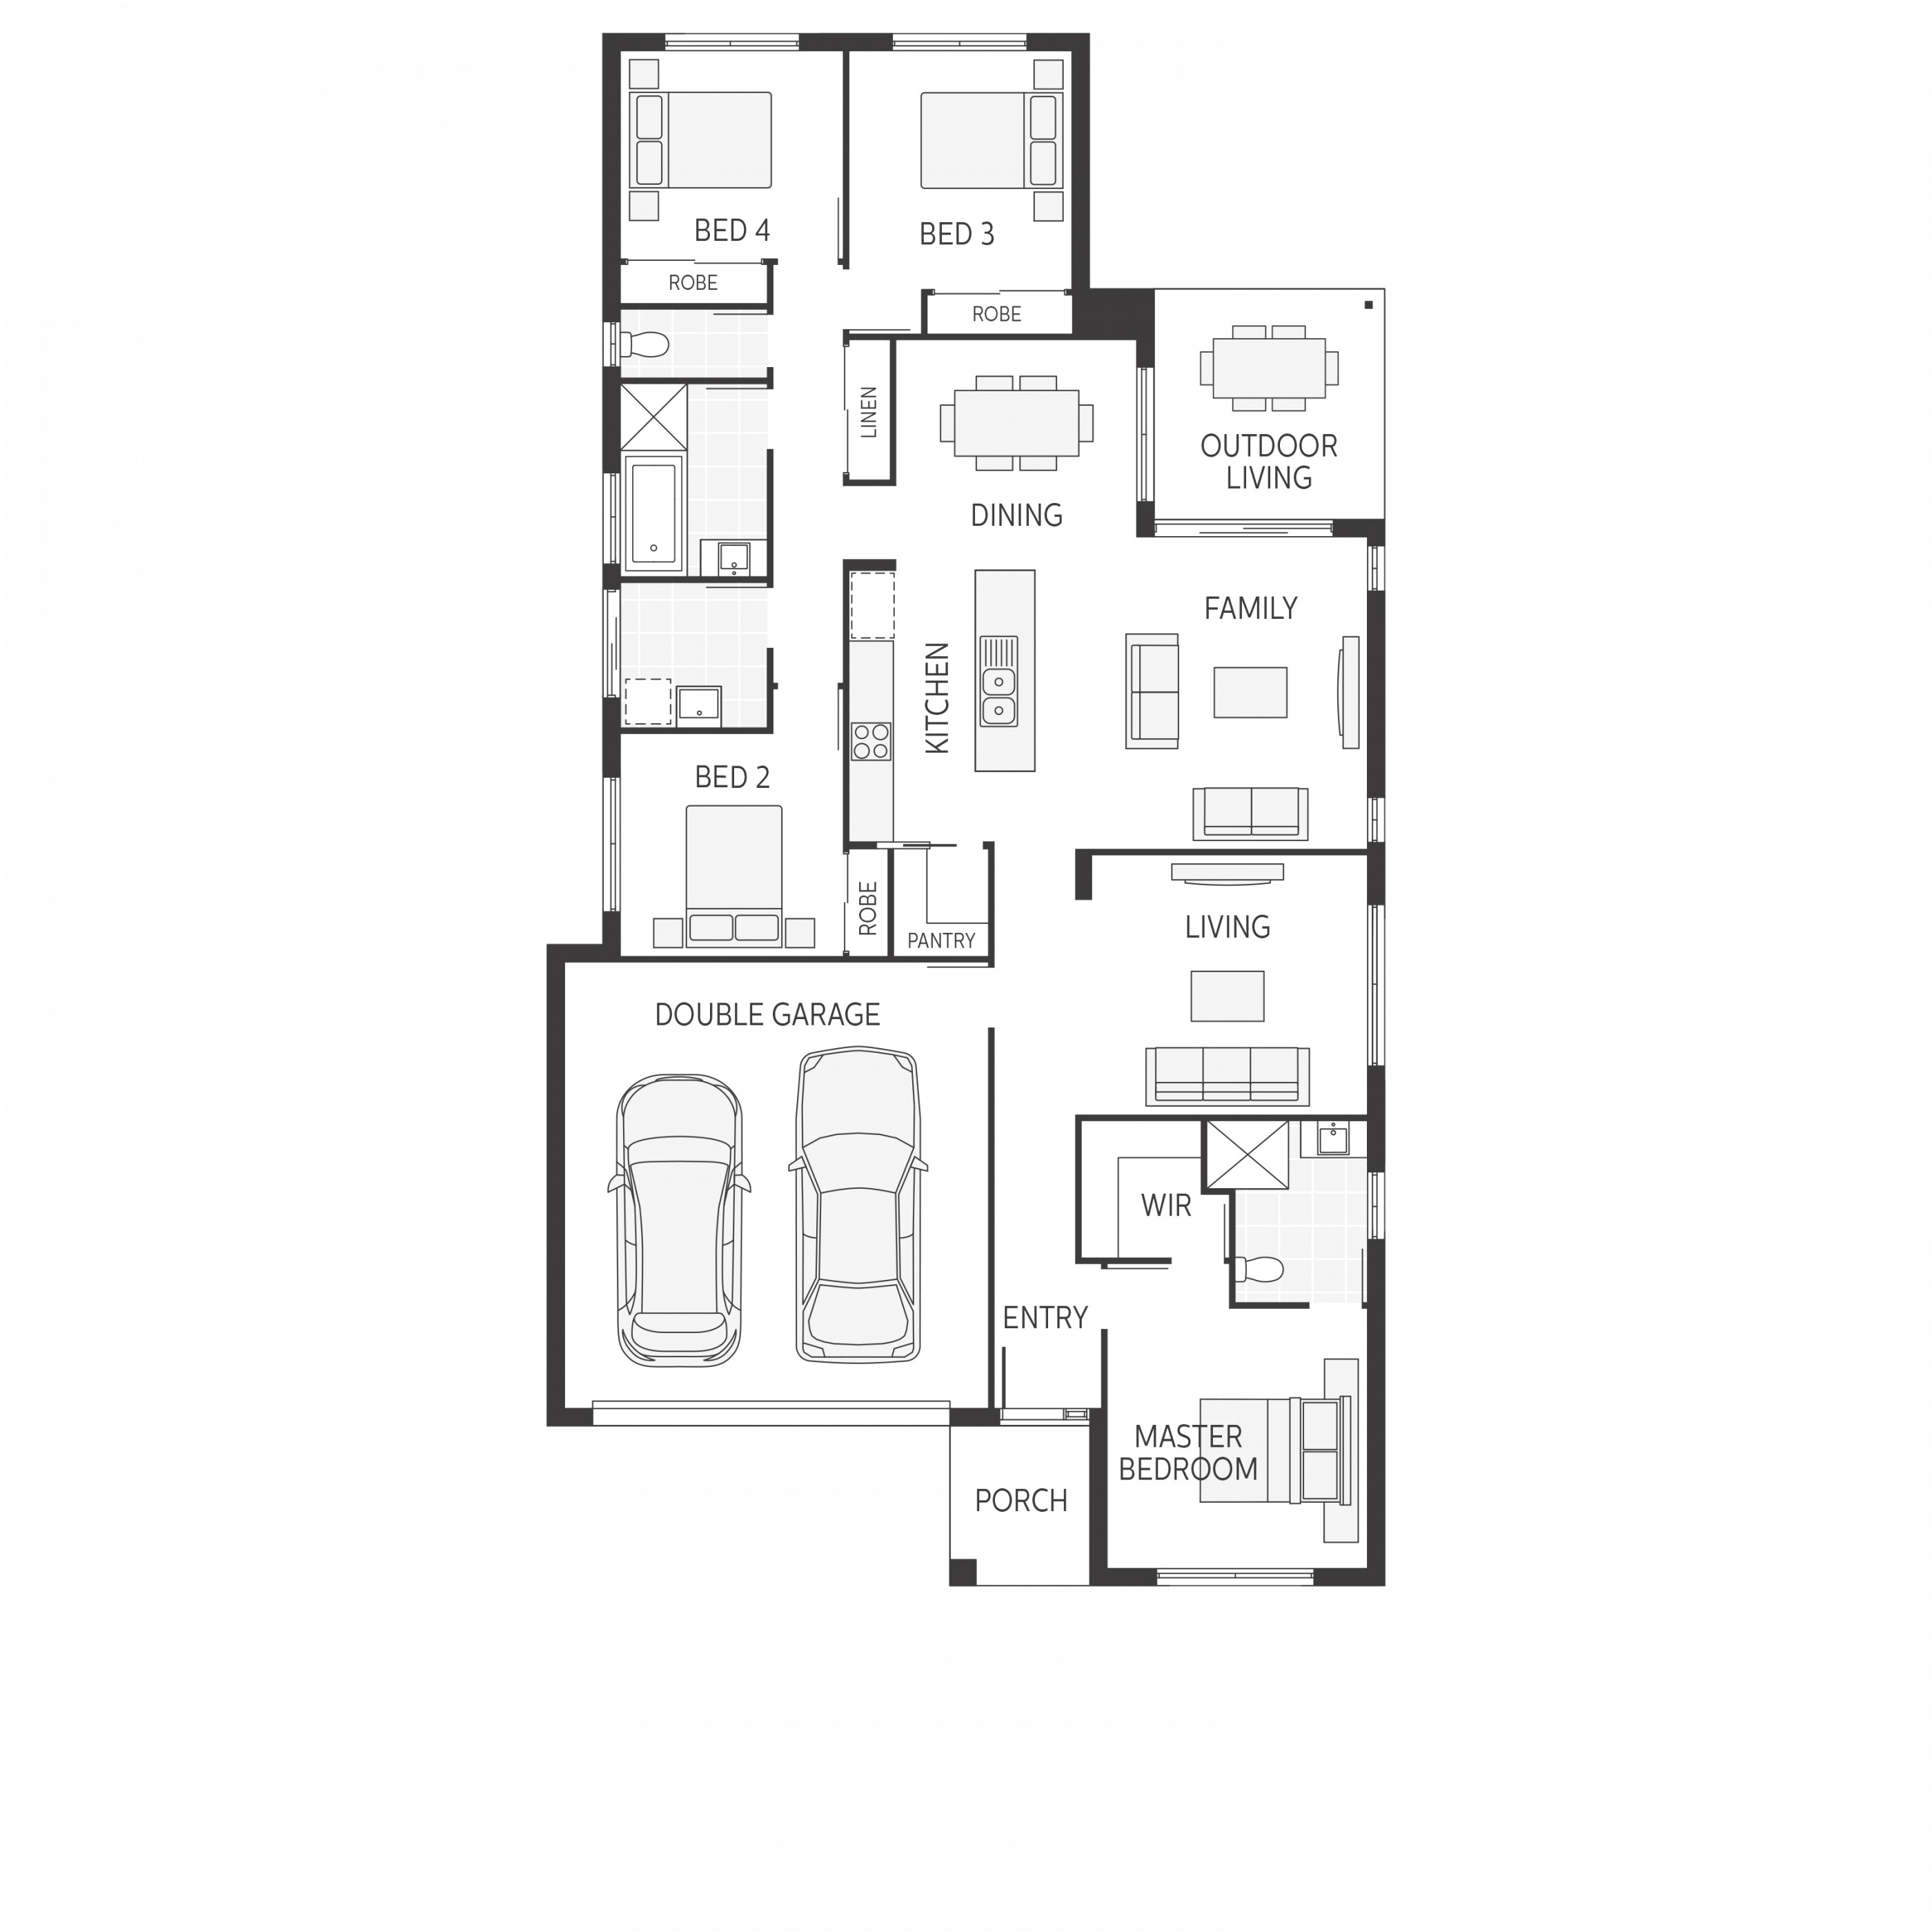 coral homes floor plans luxury coral homes daydream floor plan home decor ideas